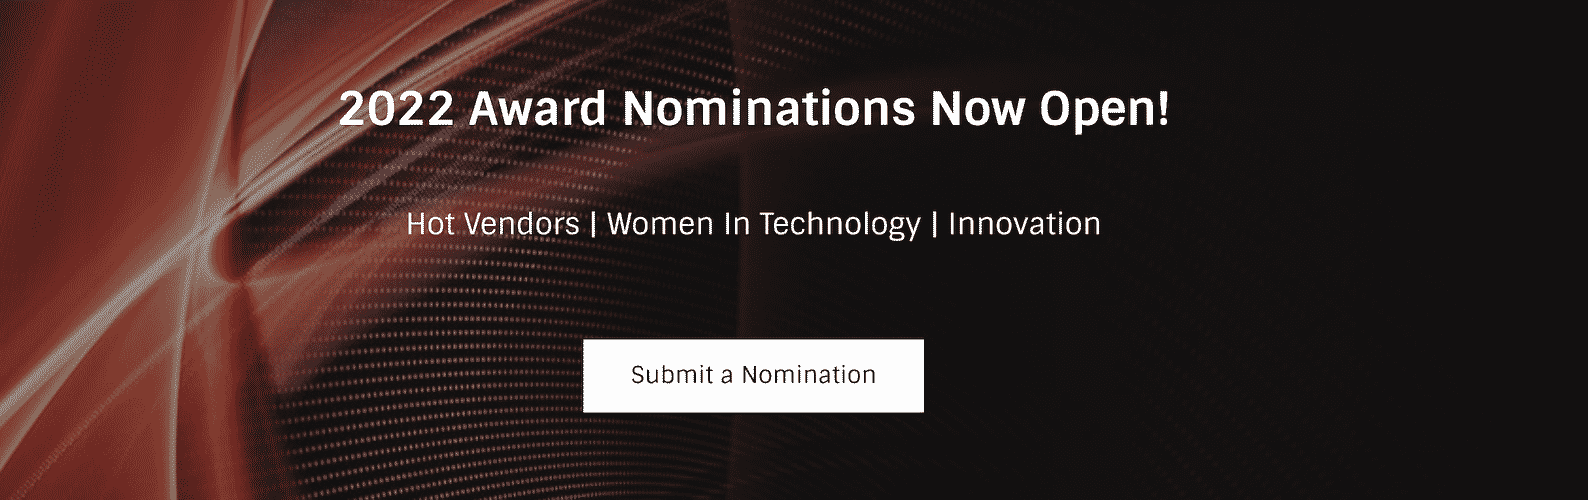 2022 AWARD NOMINATIONS OPEN - Aragon Research